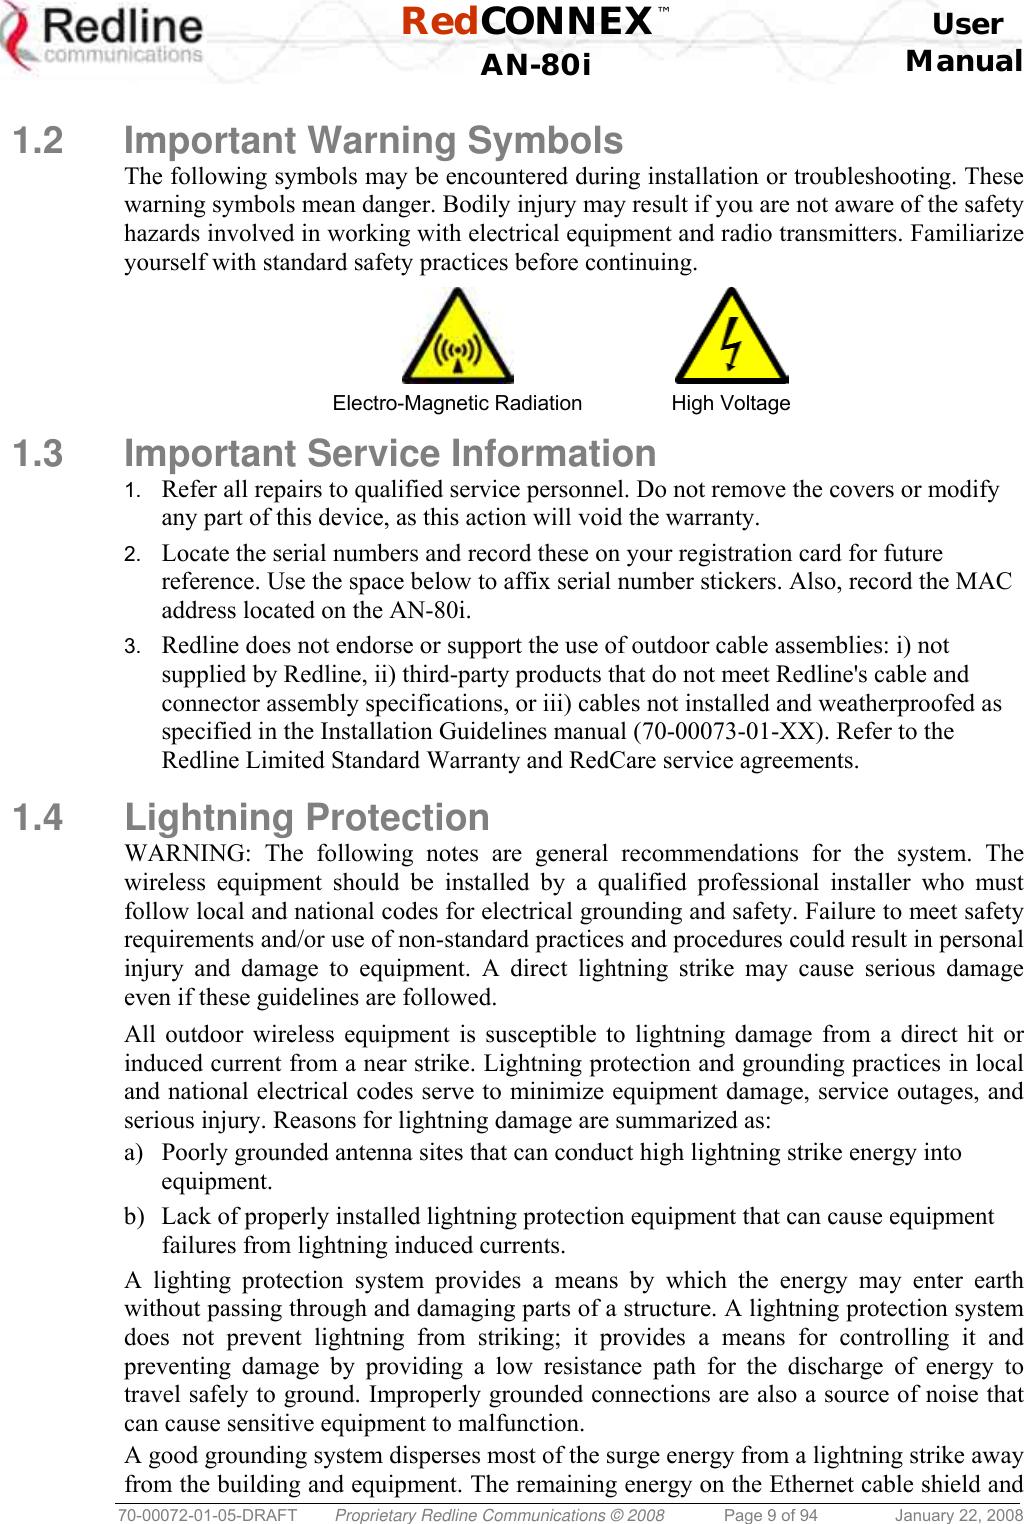  RedCONNEX™    User  AN-80i Manual  70-00072-01-05-DRAFT  Proprietary Redline Communications © 2008  Page 9 of 94  January 22, 2008  1.2 Important Warning Symbols The following symbols may be encountered during installation or troubleshooting. These warning symbols mean danger. Bodily injury may result if you are not aware of the safety hazards involved in working with electrical equipment and radio transmitters. Familiarize yourself with standard safety practices before continuing.   Electro-Magnetic Radiation  High Voltage 1.3  Important Service Information 1.  Refer all repairs to qualified service personnel. Do not remove the covers or modify any part of this device, as this action will void the warranty. 2.  Locate the serial numbers and record these on your registration card for future reference. Use the space below to affix serial number stickers. Also, record the MAC address located on the AN-80i. 3.  Redline does not endorse or support the use of outdoor cable assemblies: i) not supplied by Redline, ii) third-party products that do not meet Redline&apos;s cable and connector assembly specifications, or iii) cables not installed and weatherproofed as specified in the Installation Guidelines manual (70-00073-01-XX). Refer to the Redline Limited Standard Warranty and RedCare service agreements.  1.4 Lightning Protection WARNING: The following notes are general recommendations for the system. The wireless equipment should be installed by a qualified professional installer who must follow local and national codes for electrical grounding and safety. Failure to meet safety requirements and/or use of non-standard practices and procedures could result in personal injury and damage to equipment. A direct lightning strike may cause serious damage even if these guidelines are followed. All outdoor wireless equipment is susceptible to lightning damage from a direct hit or induced current from a near strike. Lightning protection and grounding practices in local and national electrical codes serve to minimize equipment damage, service outages, and serious injury. Reasons for lightning damage are summarized as: a)  Poorly grounded antenna sites that can conduct high lightning strike energy into equipment. b)  Lack of properly installed lightning protection equipment that can cause equipment failures from lightning induced currents. A lighting protection system provides a means by which the energy may enter earth without passing through and damaging parts of a structure. A lightning protection system does not prevent lightning from striking; it provides a means for controlling it and preventing damage by providing a low resistance path for the discharge of energy to travel safely to ground. Improperly grounded connections are also a source of noise that can cause sensitive equipment to malfunction. A good grounding system disperses most of the surge energy from a lightning strike away from the building and equipment. The remaining energy on the Ethernet cable shield and 